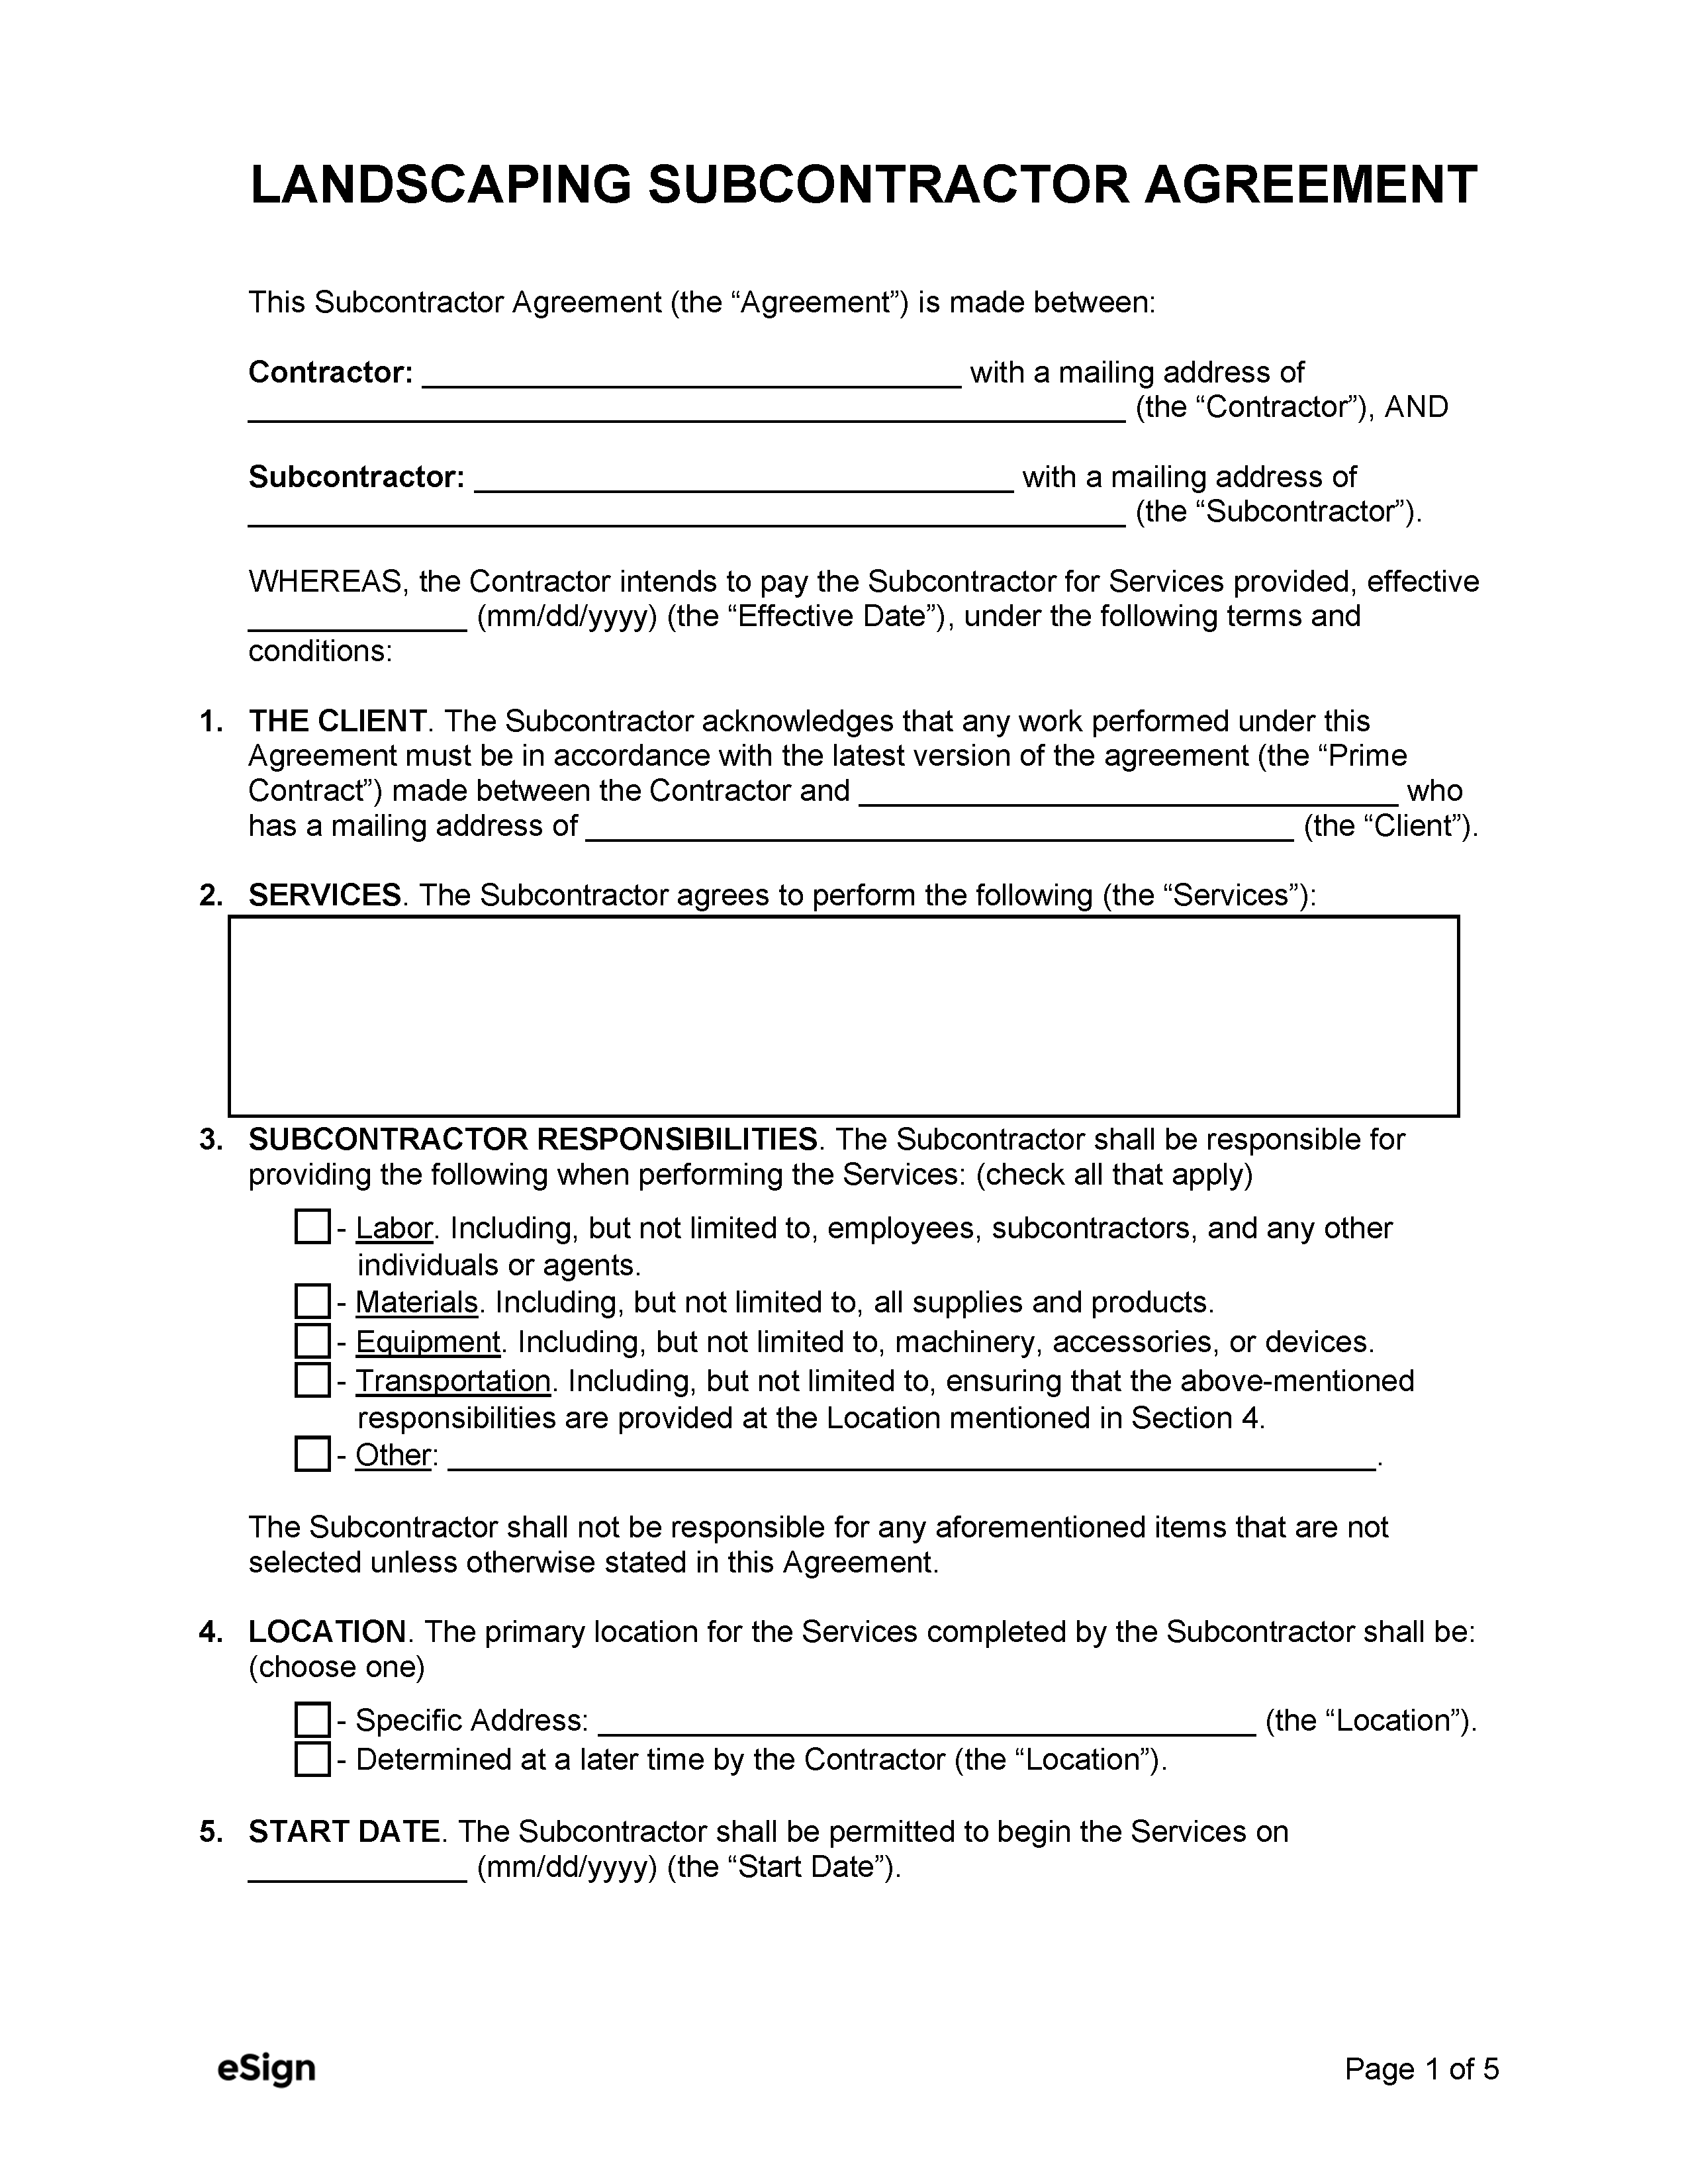 free-landscaping-subcontractor-agreement-pdf-word